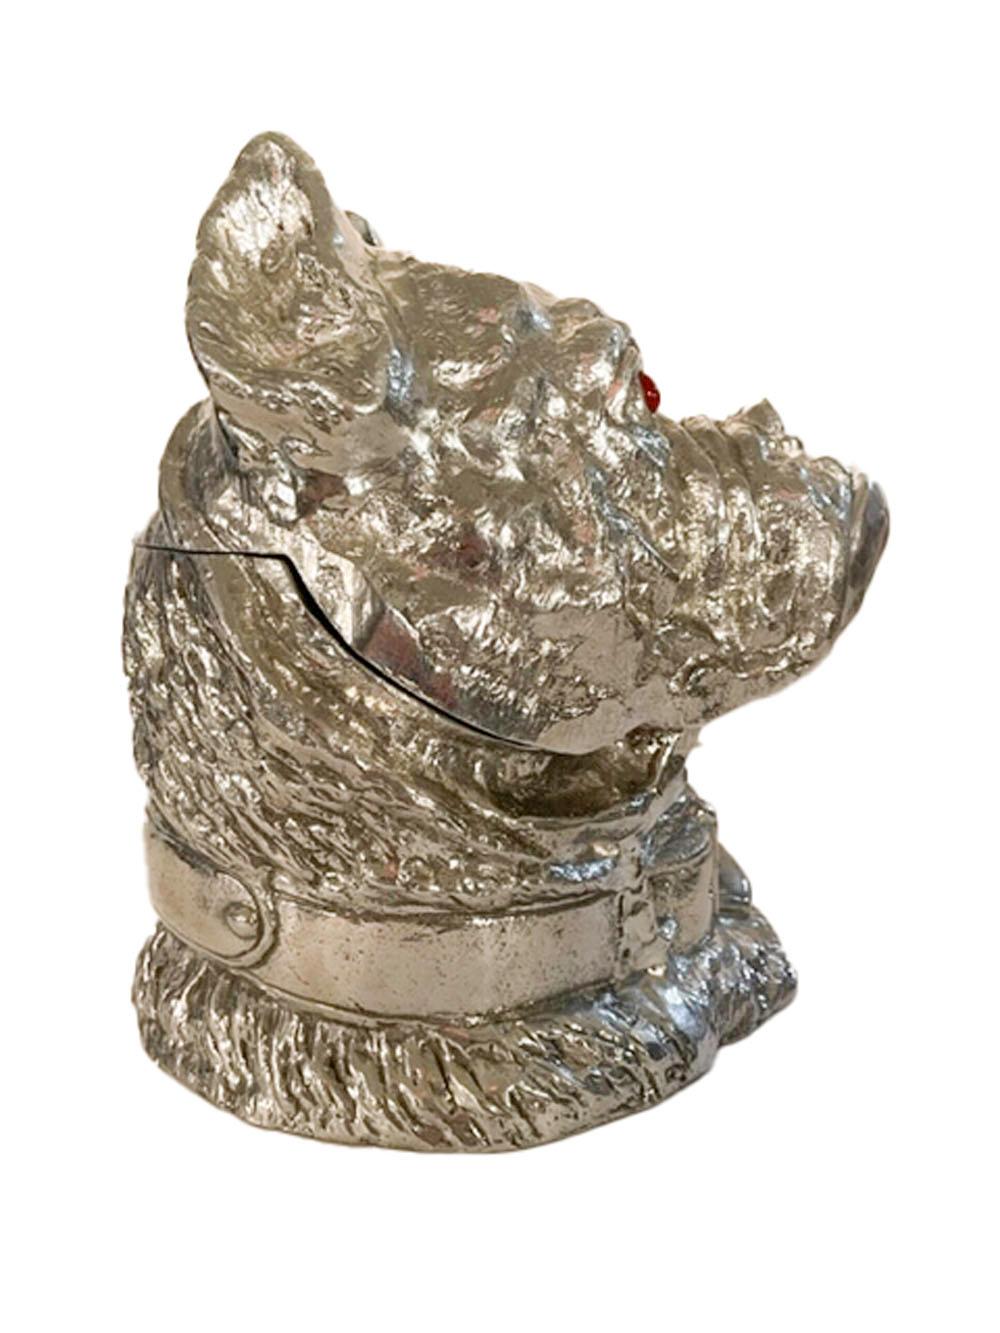 American Arthur Court Cast Aluminum Bulldog Ice Bucket with Red Glass Eyes For Sale